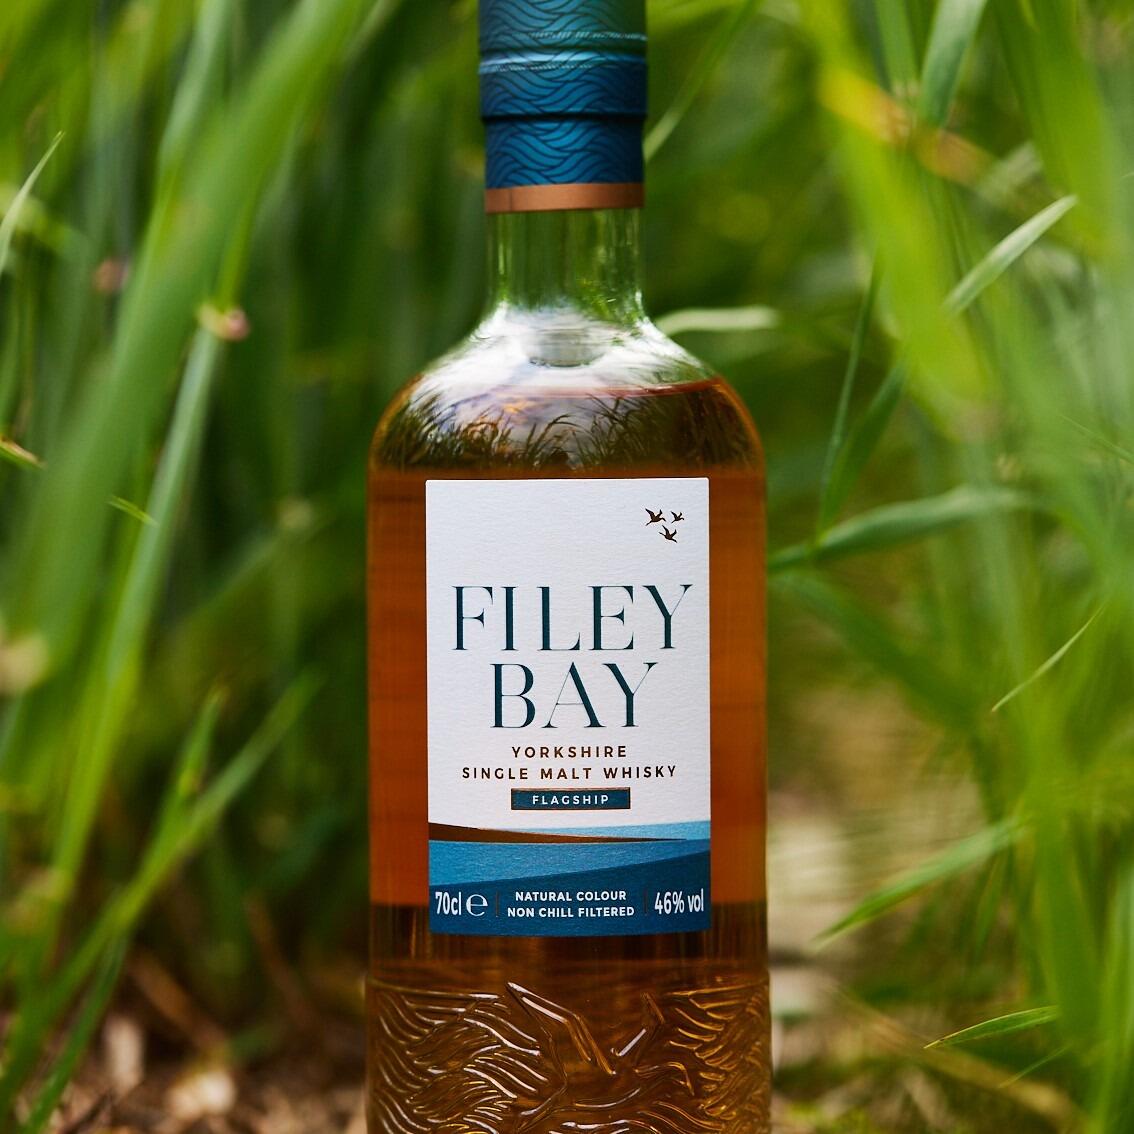 Hero shot of Filey Bay Whisky flagship in the barley field with lush green crops.